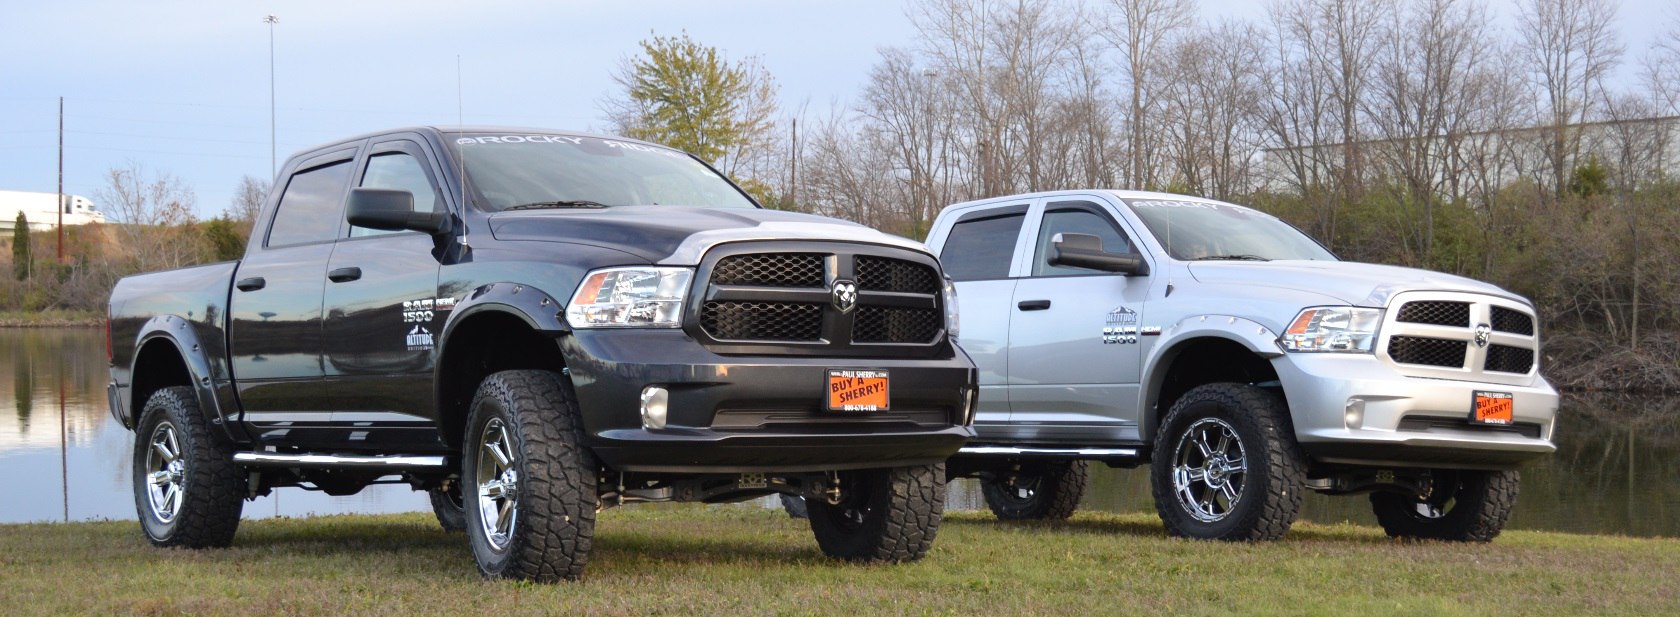 Lifted 4x4 Trucks 4 Sale  Bing images